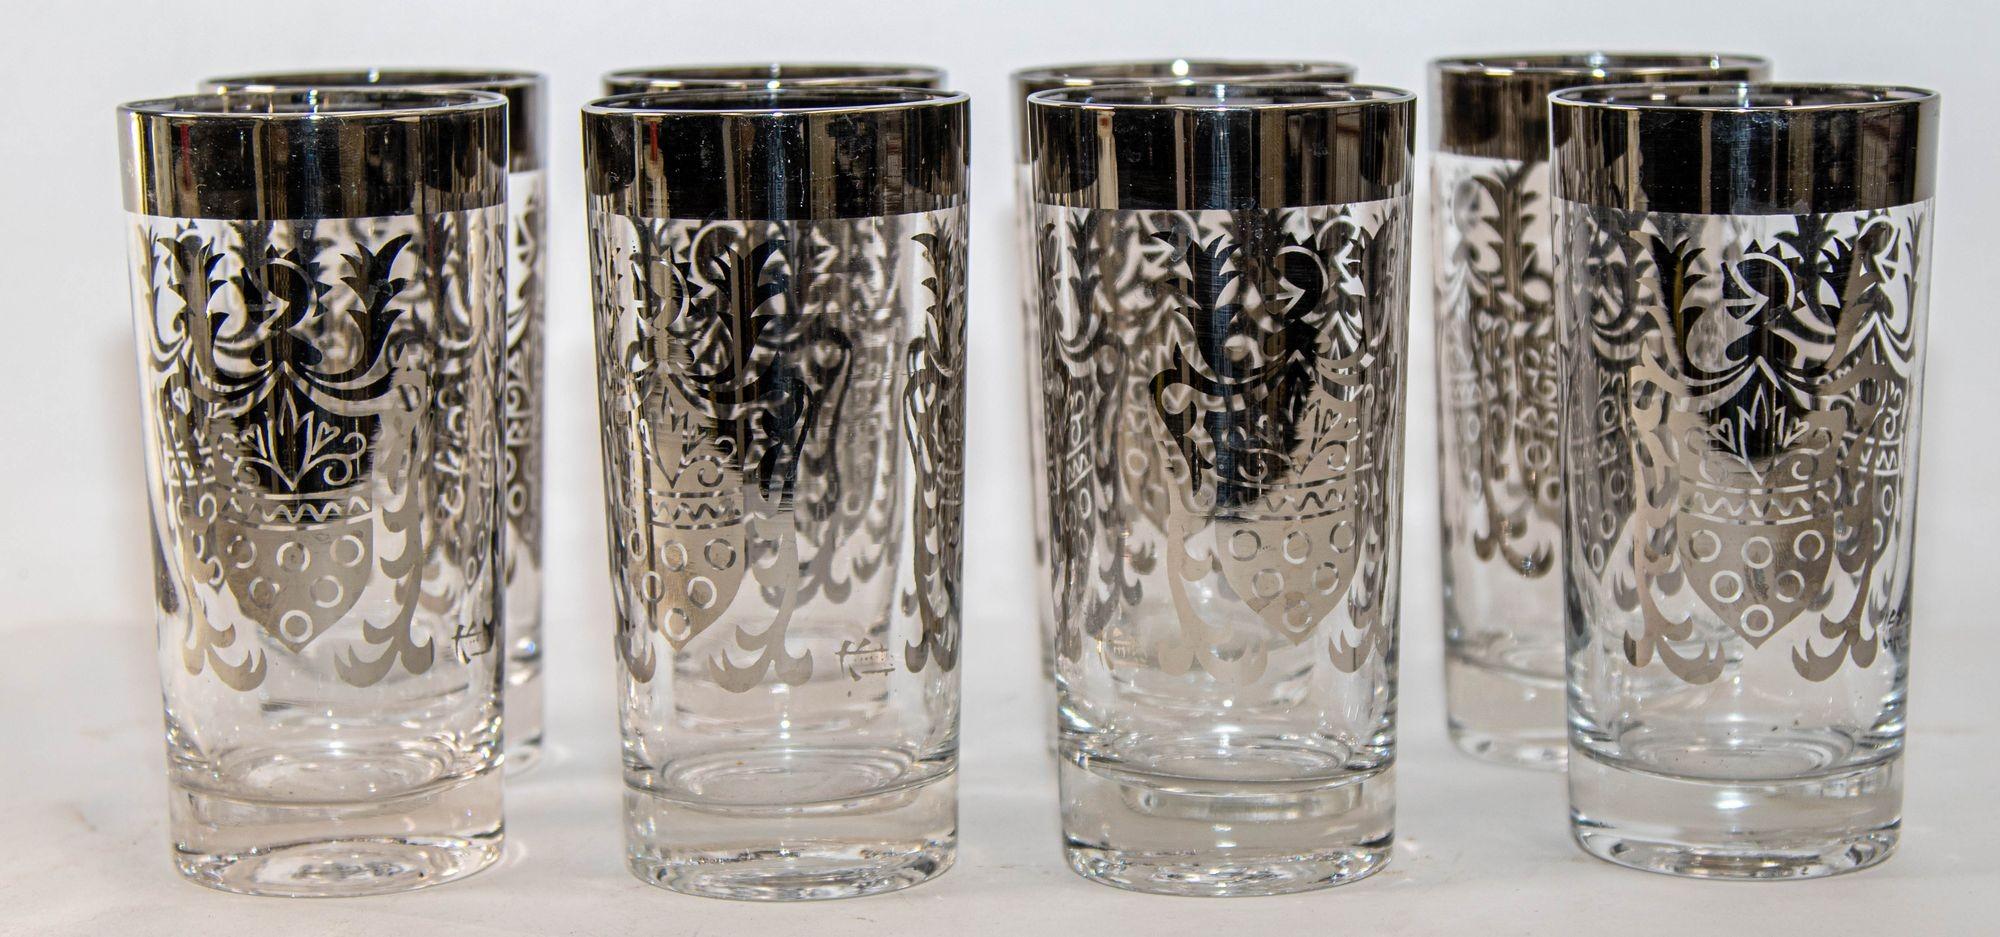 Vintage Kimiko Signed Silver High Ball Glasses Set of 8 with Carrying Caddy 60's For Sale 13